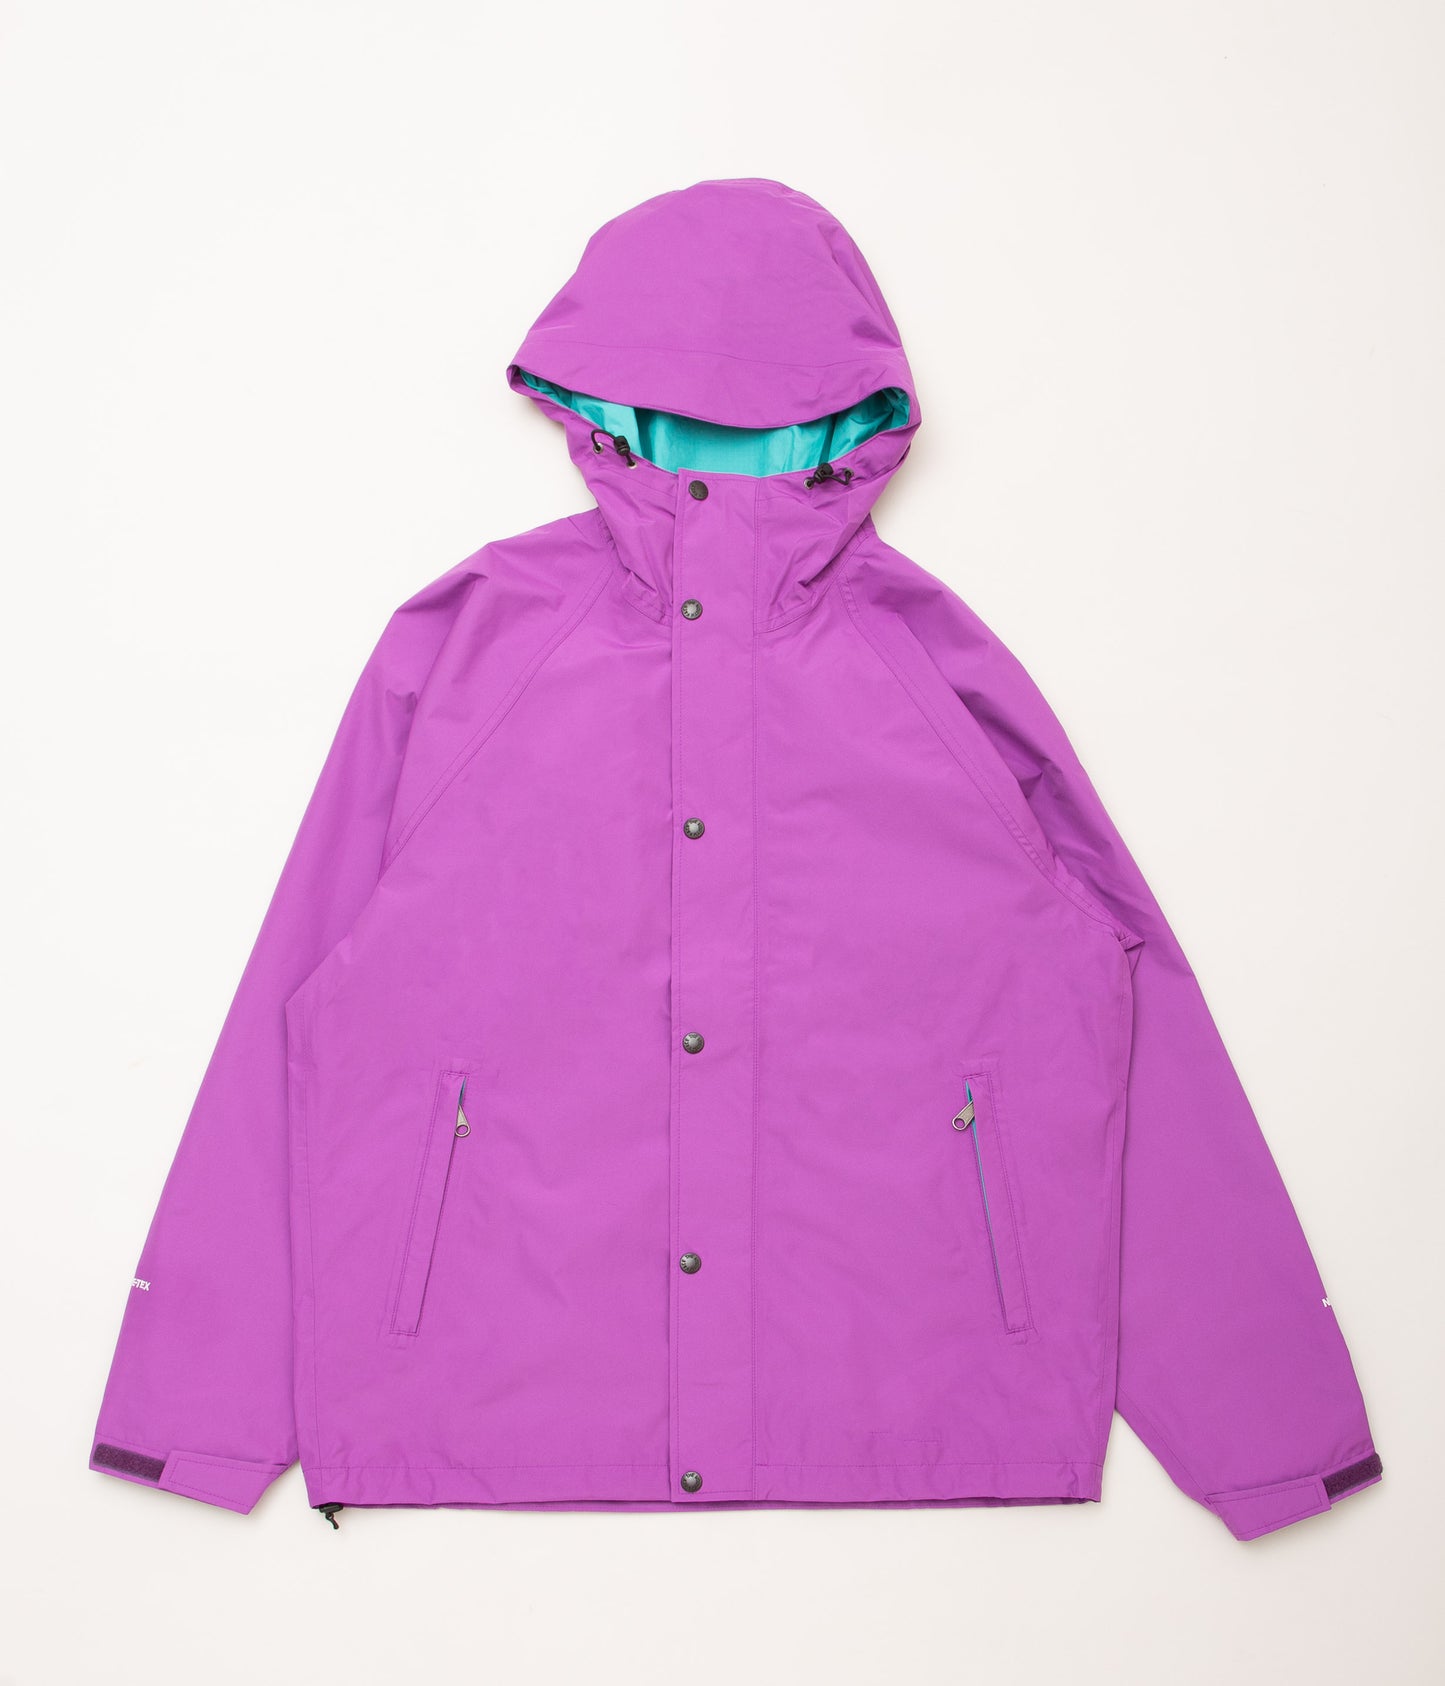 THE NORTH FACE "STOWAWAY JACKET"(AQ)